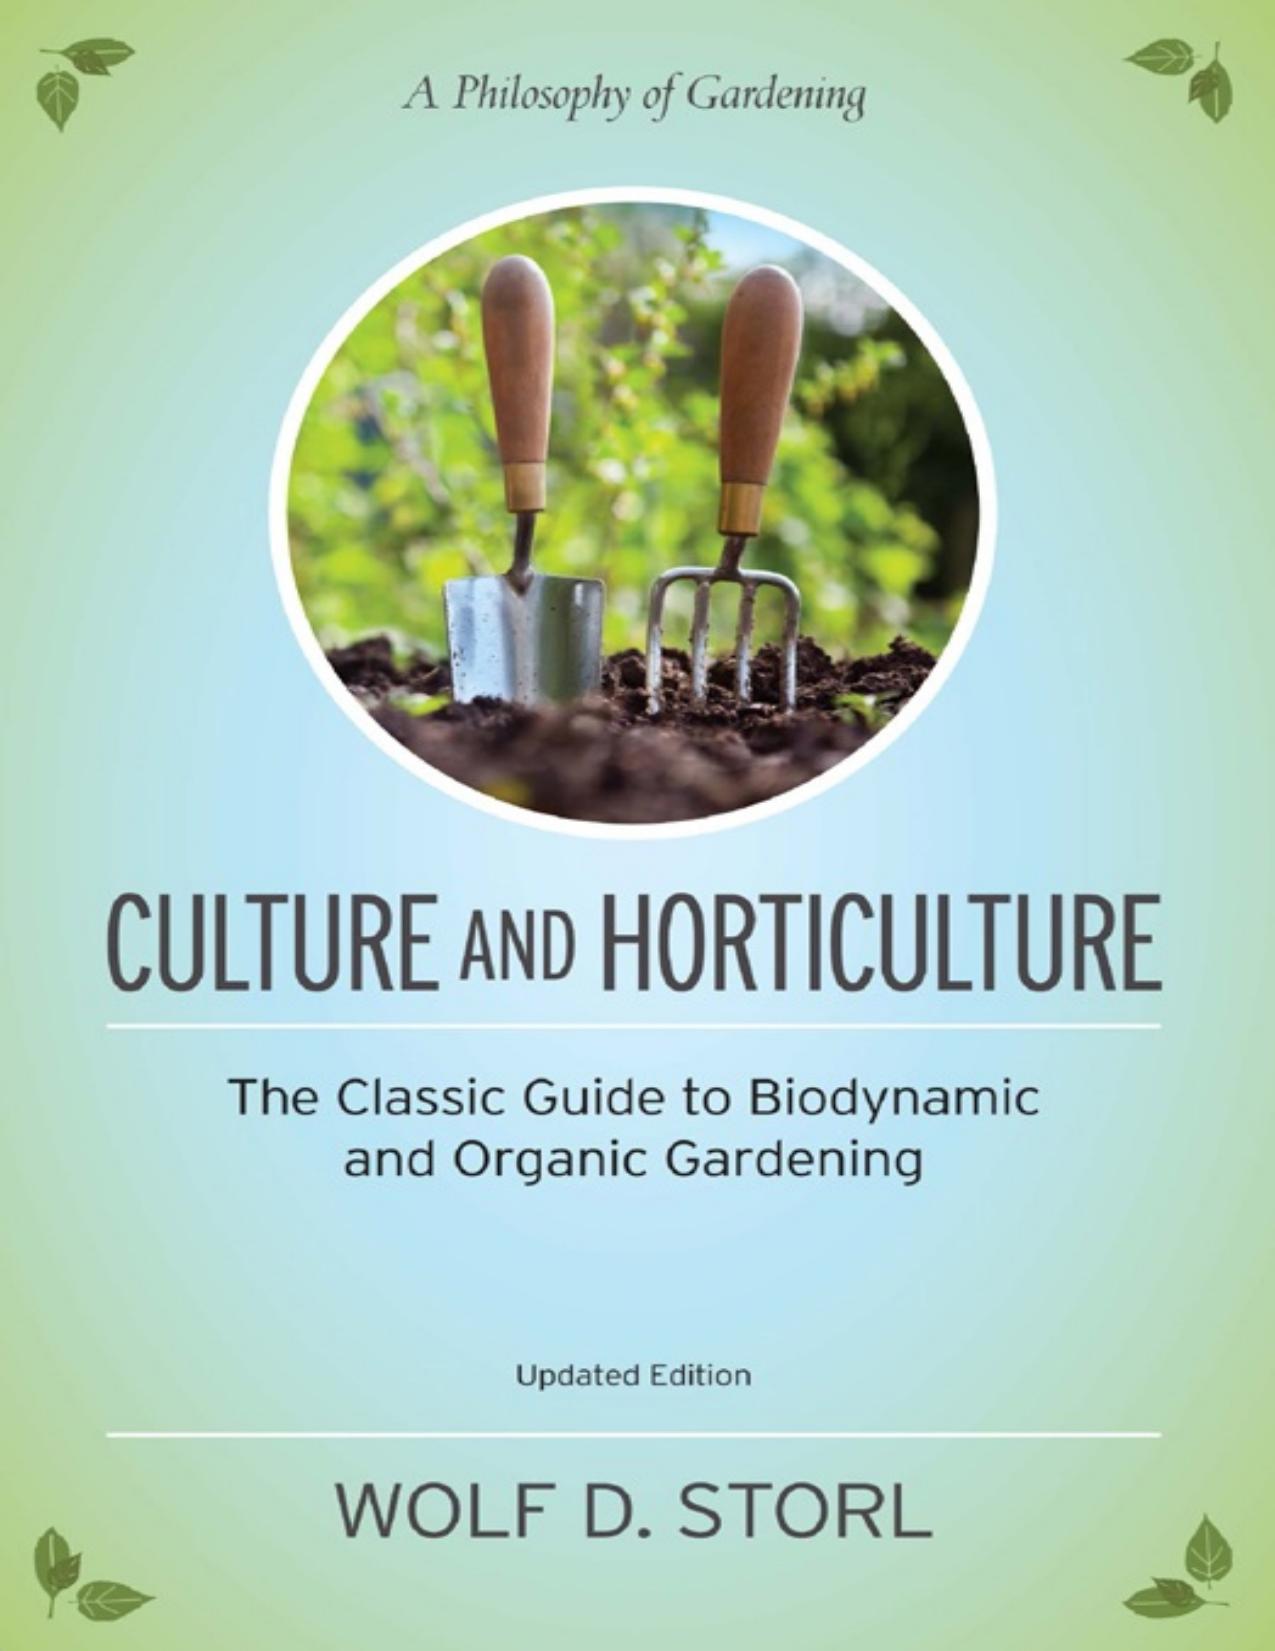 Culture and Horticulture: The Classic Guide to Biodynamic and Organic Gardening - PDFDrive.com